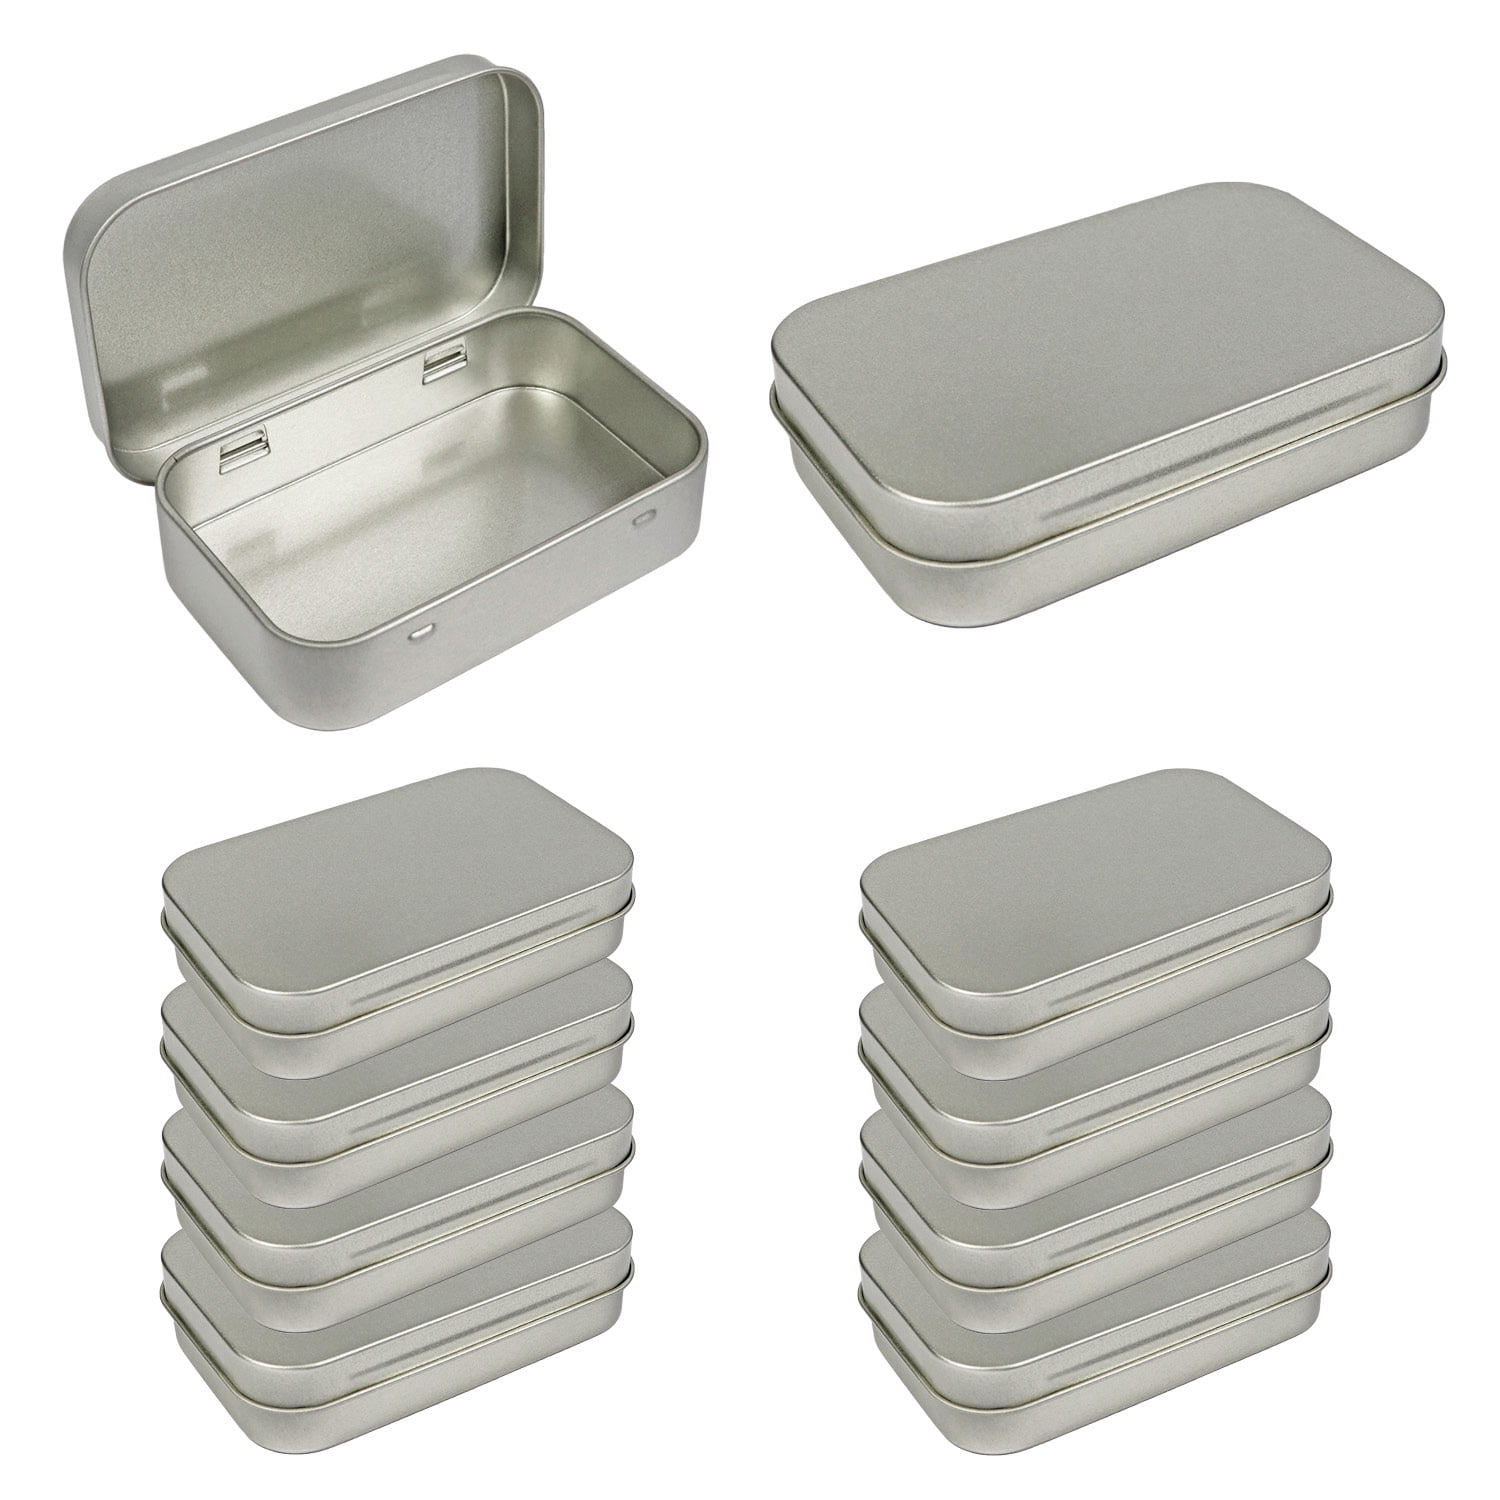 10 Pack Metal Rectangular Empty Hinged Tins Box Containers 3.75 by